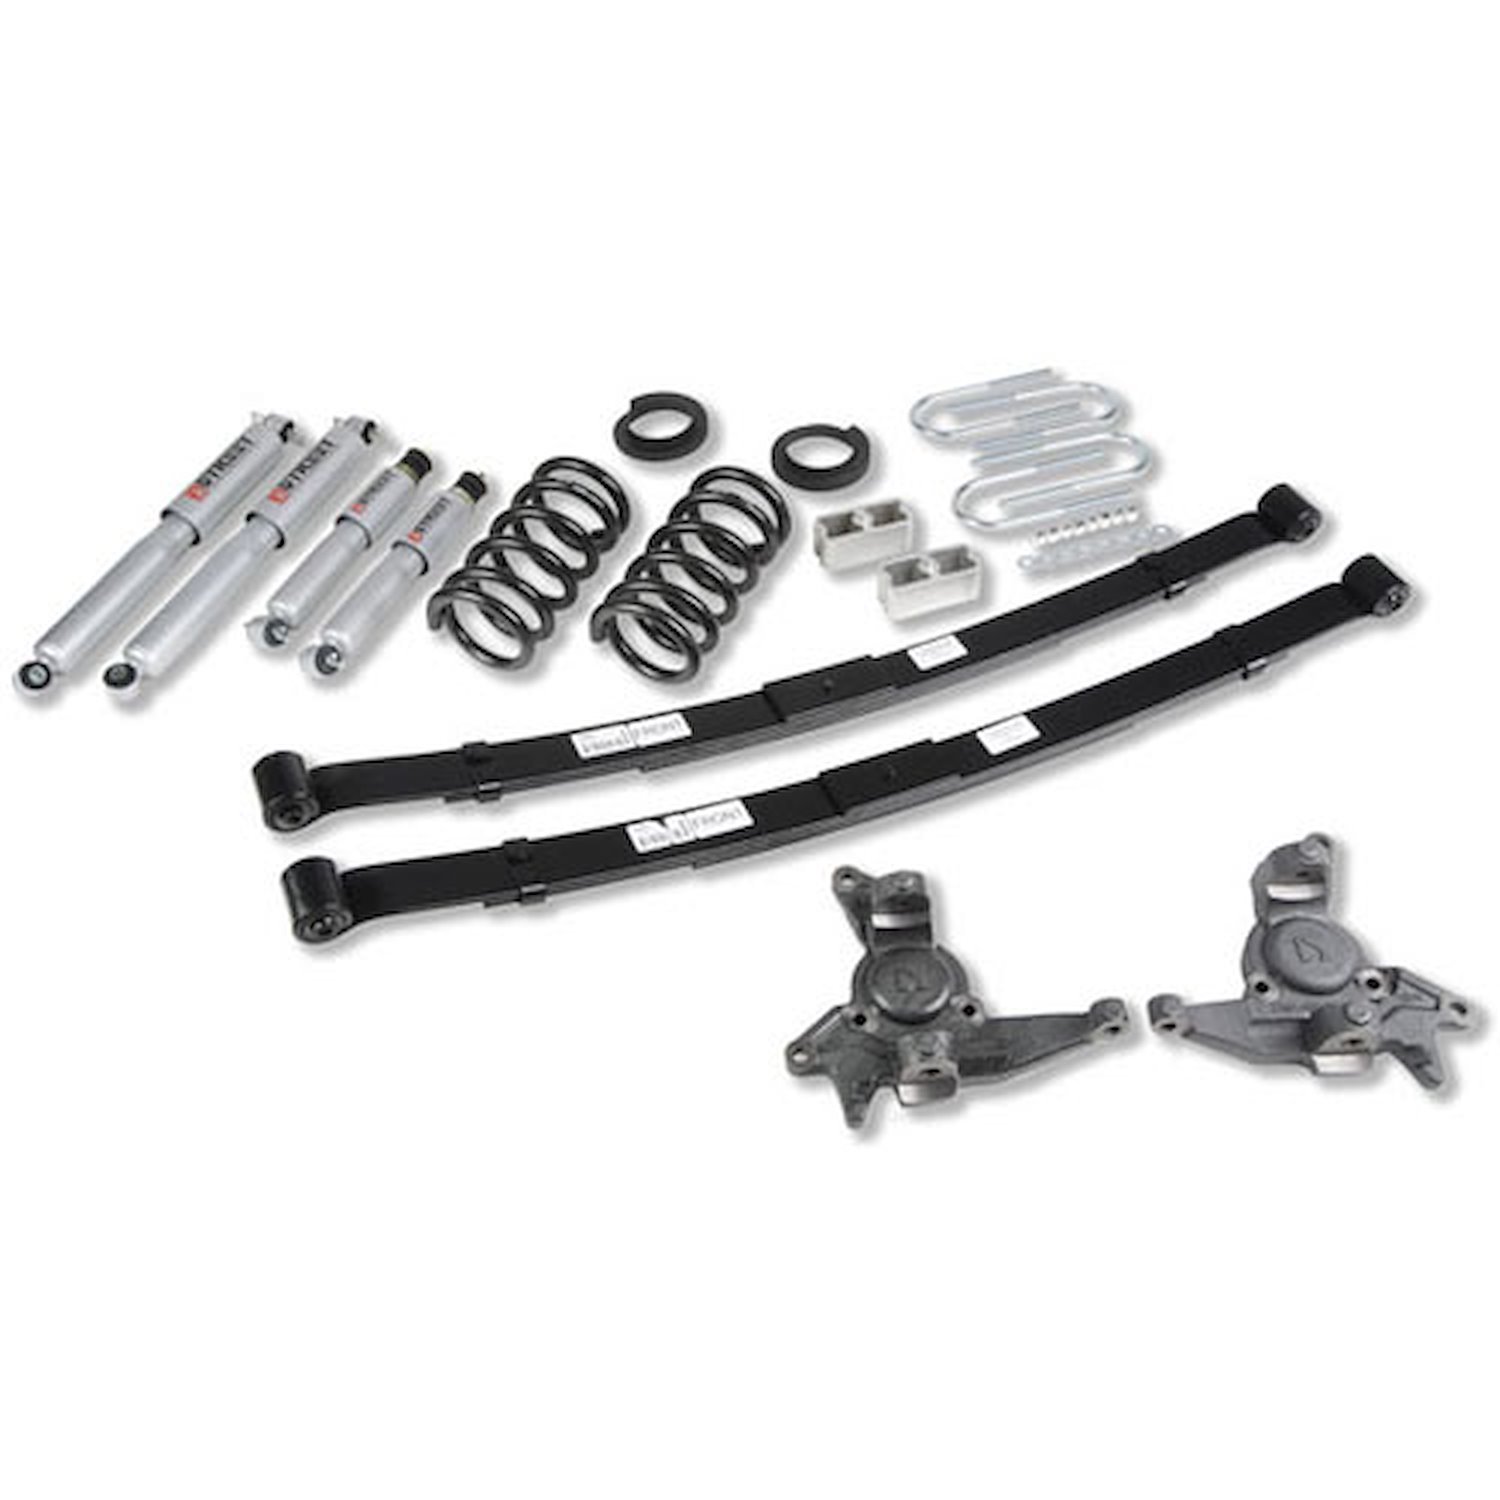 Complete Lowering Kit for 1998-2003 Chevy Blazer/GMC Jimmy